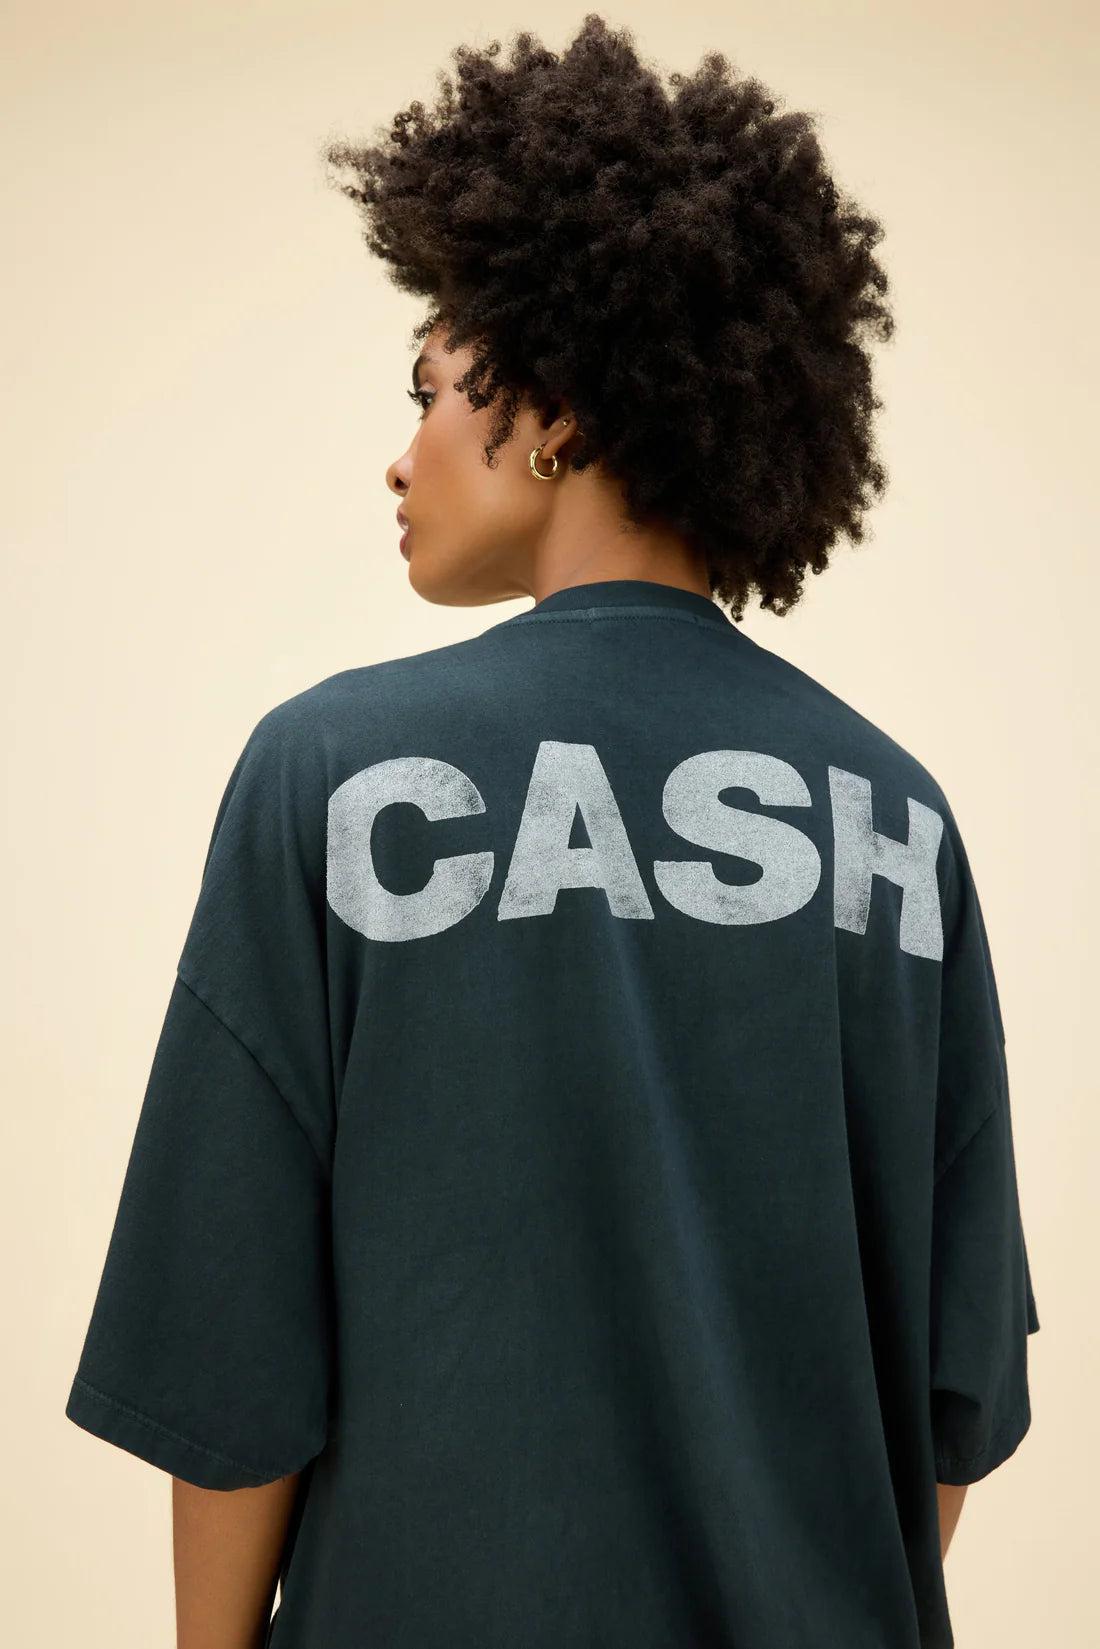 Johnny Cash Silhouette OS Tee by Daydreamer